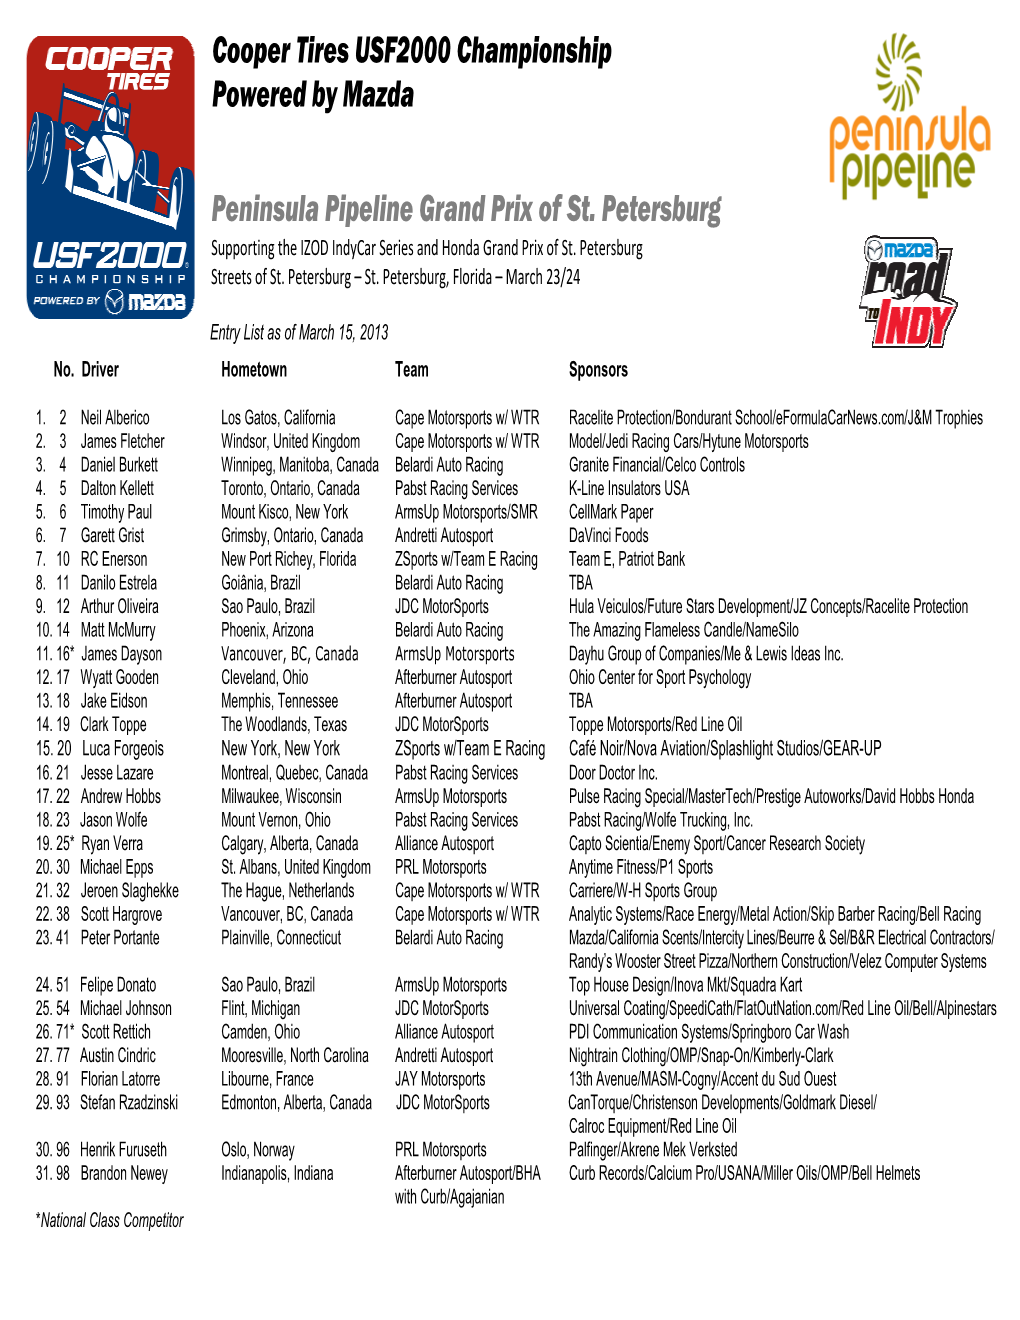 Entry List As of March 15, 2013